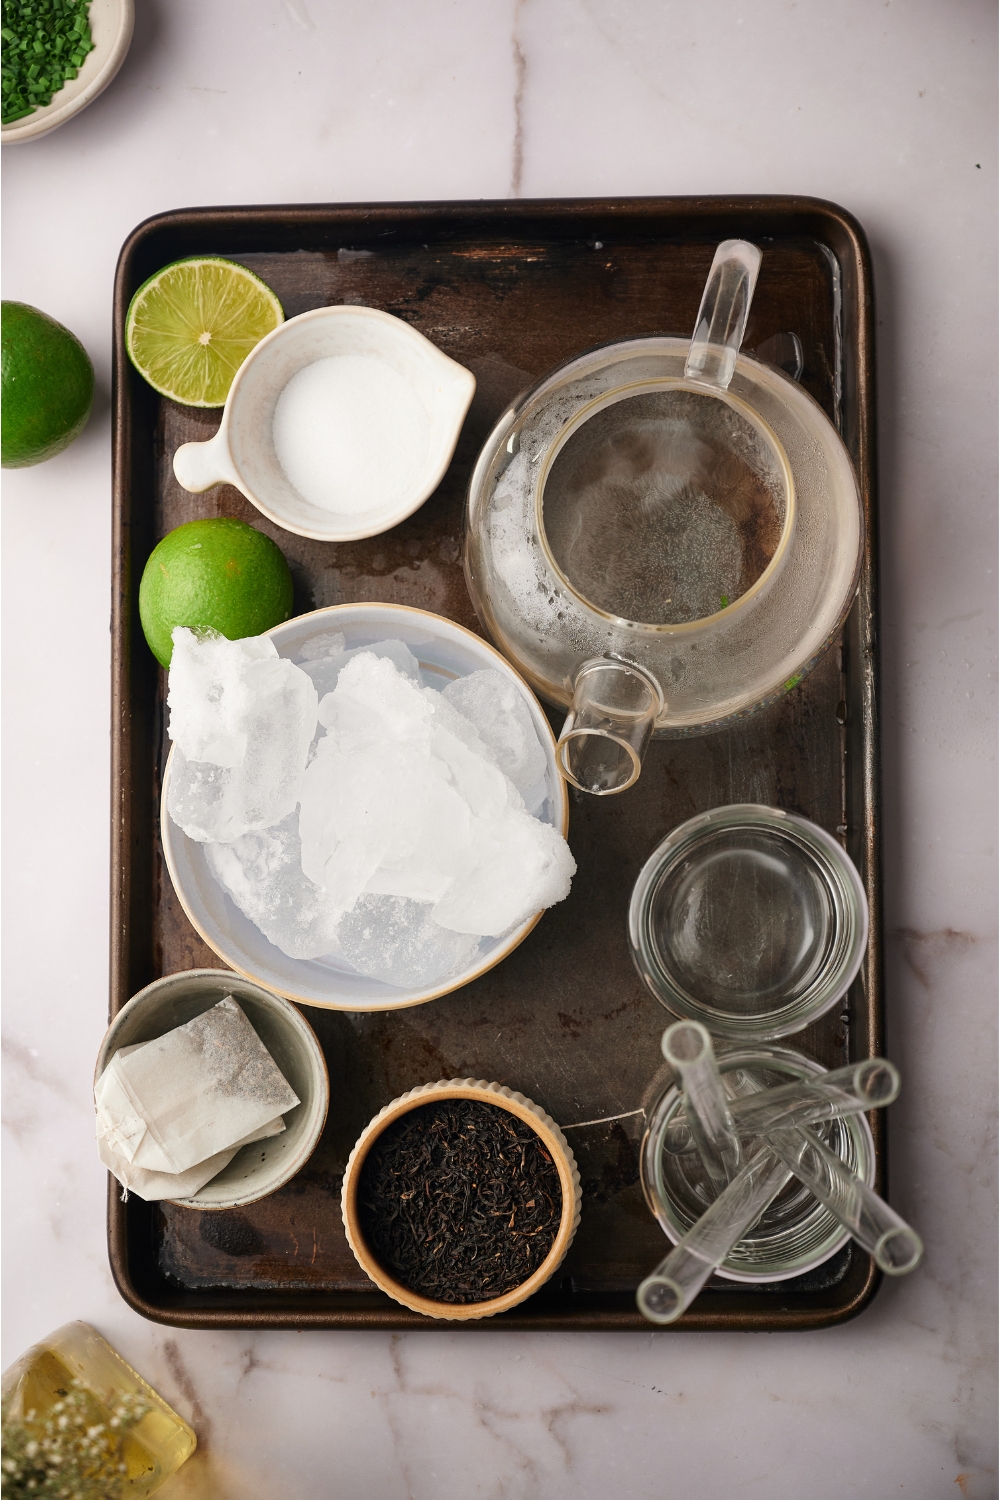 Overhead view of a tray with a tea pot, a bowl of ice, a bowl of sugar, tea bags, limes, an empty glass, and a glass filled with straws.